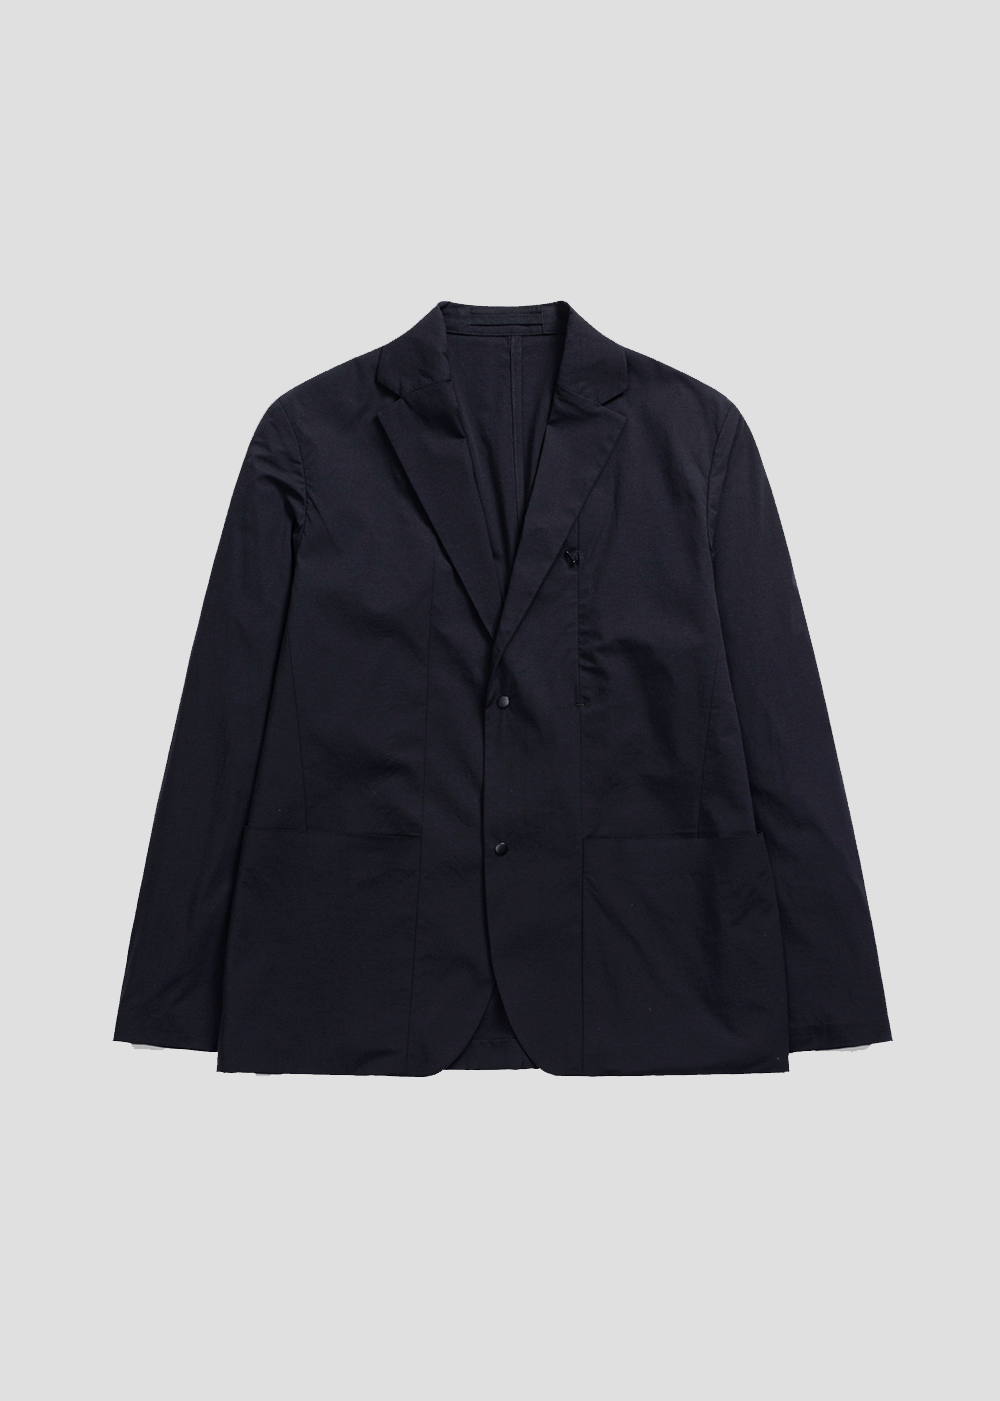 Norse Projects Light Jacket in Black 